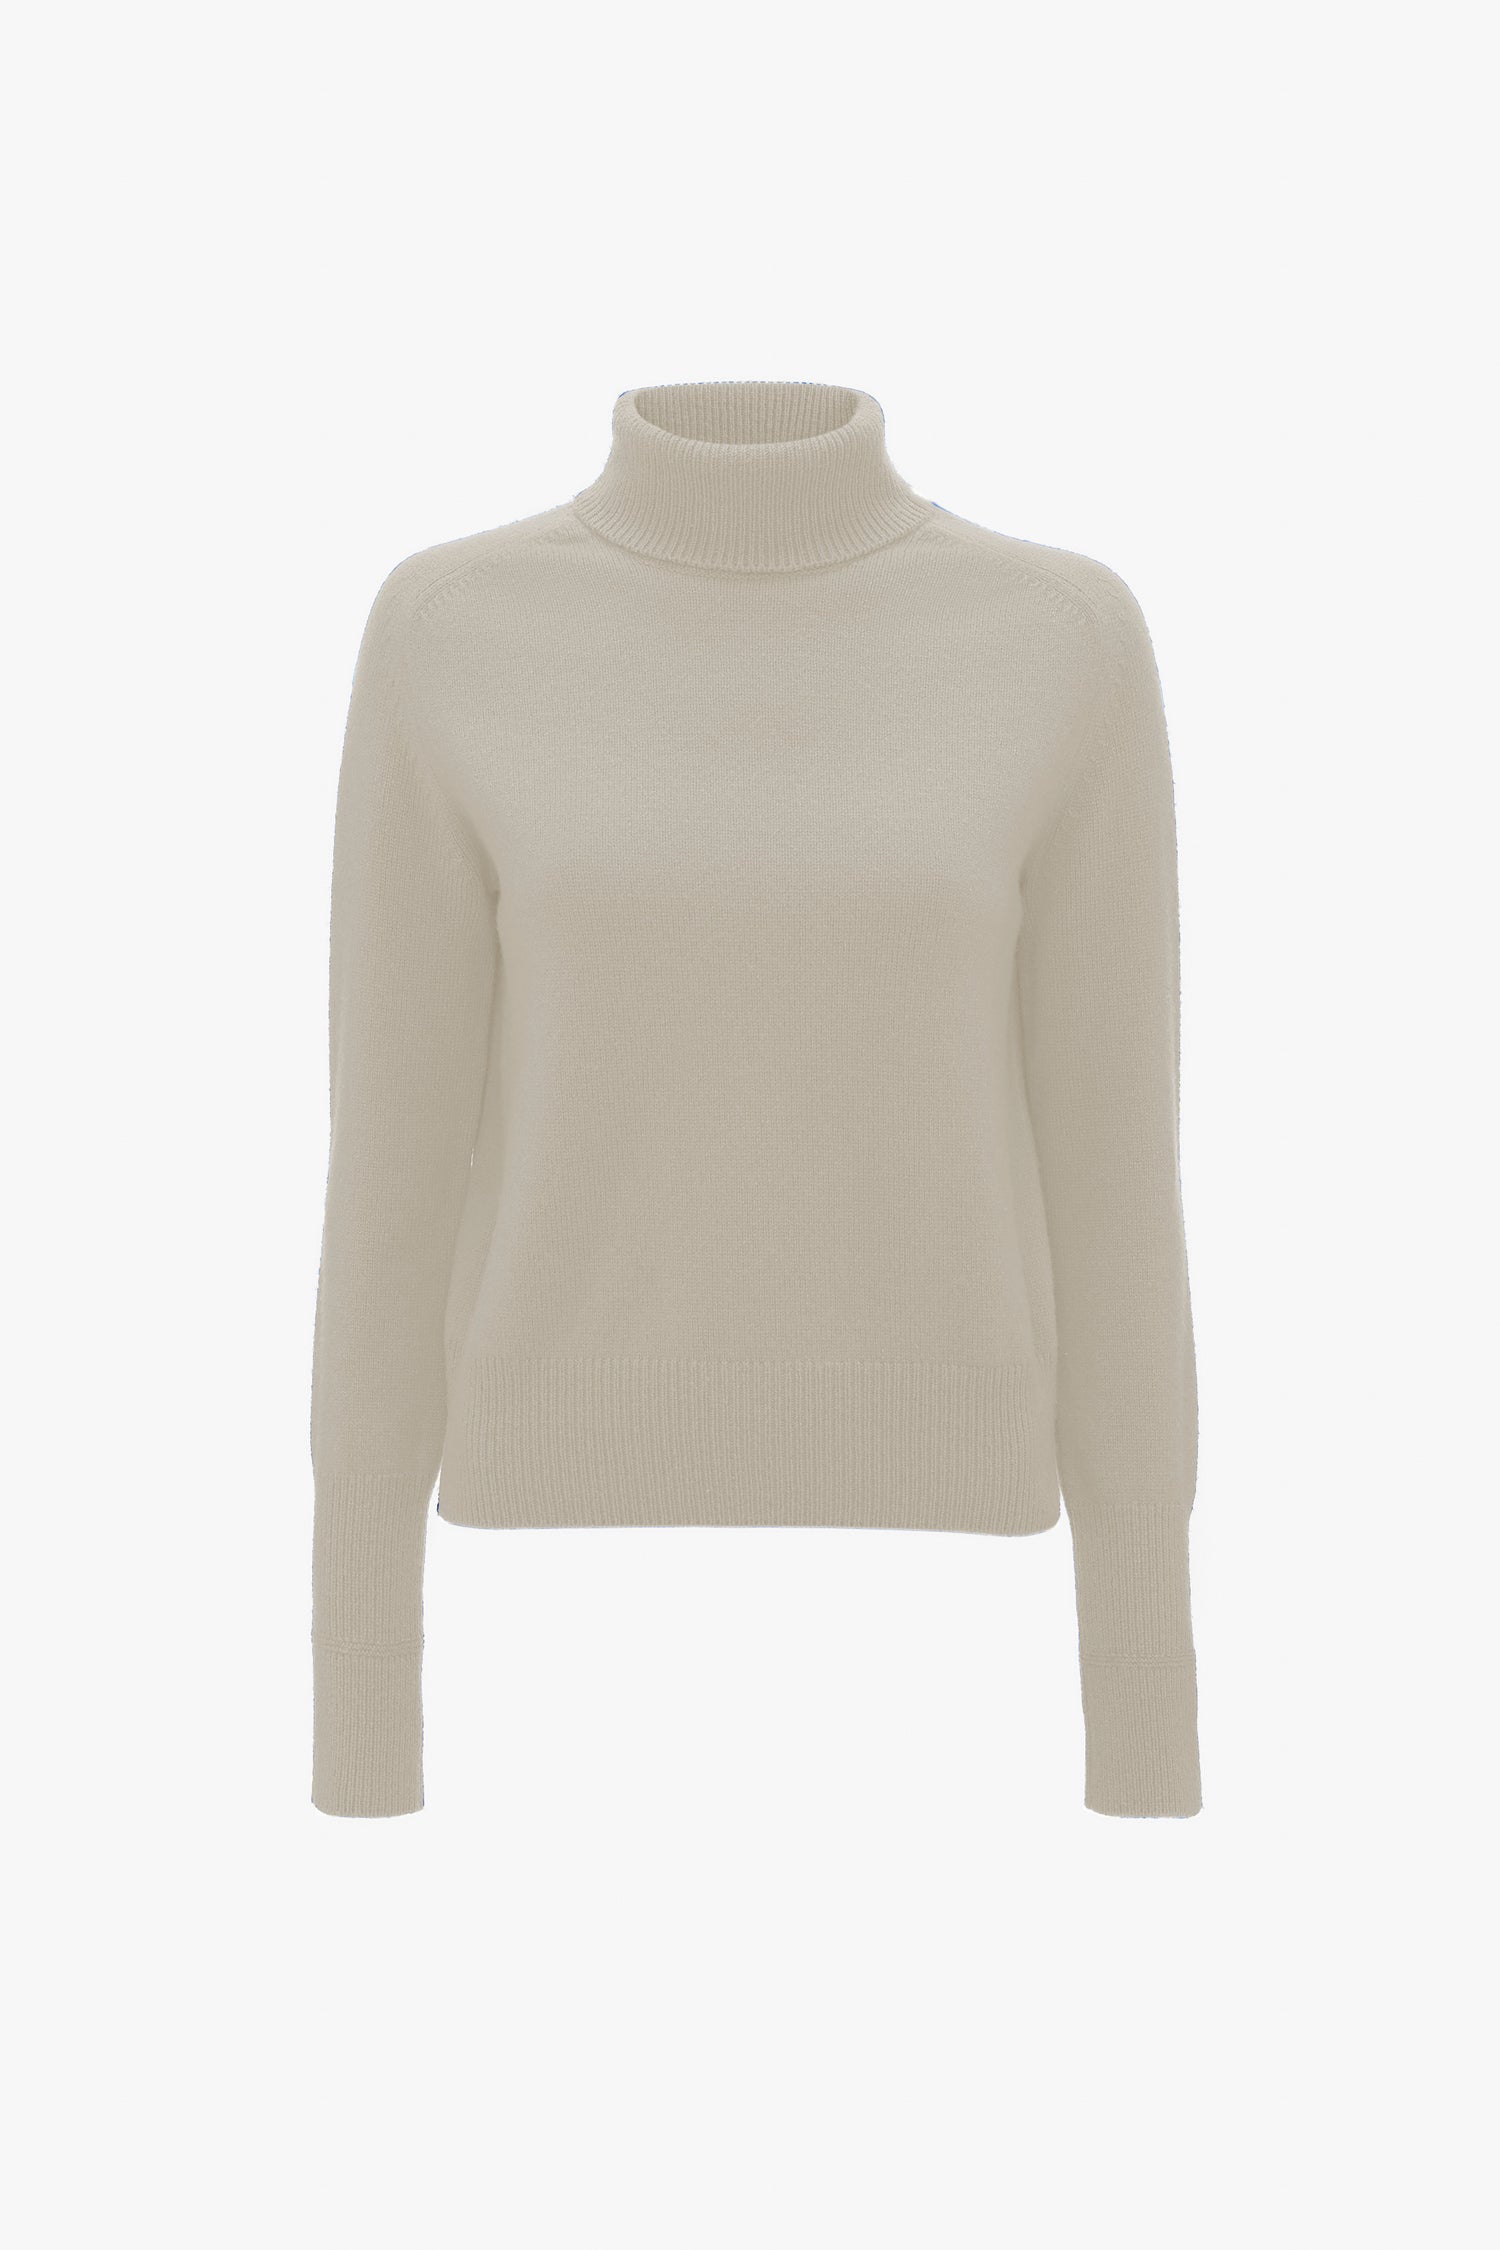 A Victoria Beckham polo neck jumper in ivory displayed against a white background.